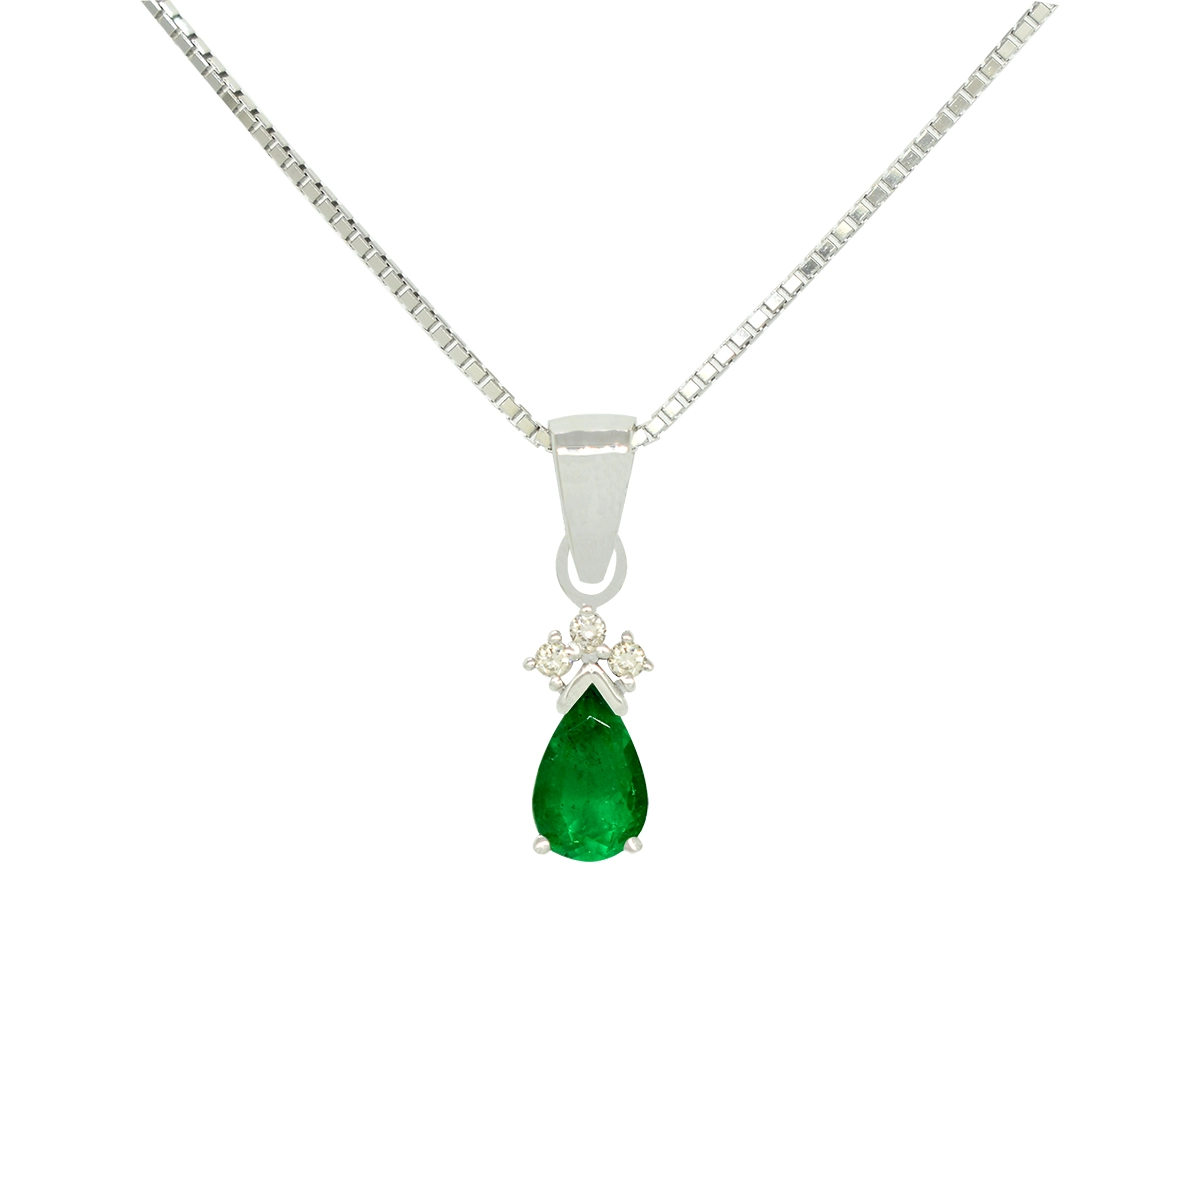 0.44 Ct. pear-shaped natural Colombian emerald set with 3 round cut genuine diamonds in 0.04 Ct. t.w. a custom-made small pendant necklace